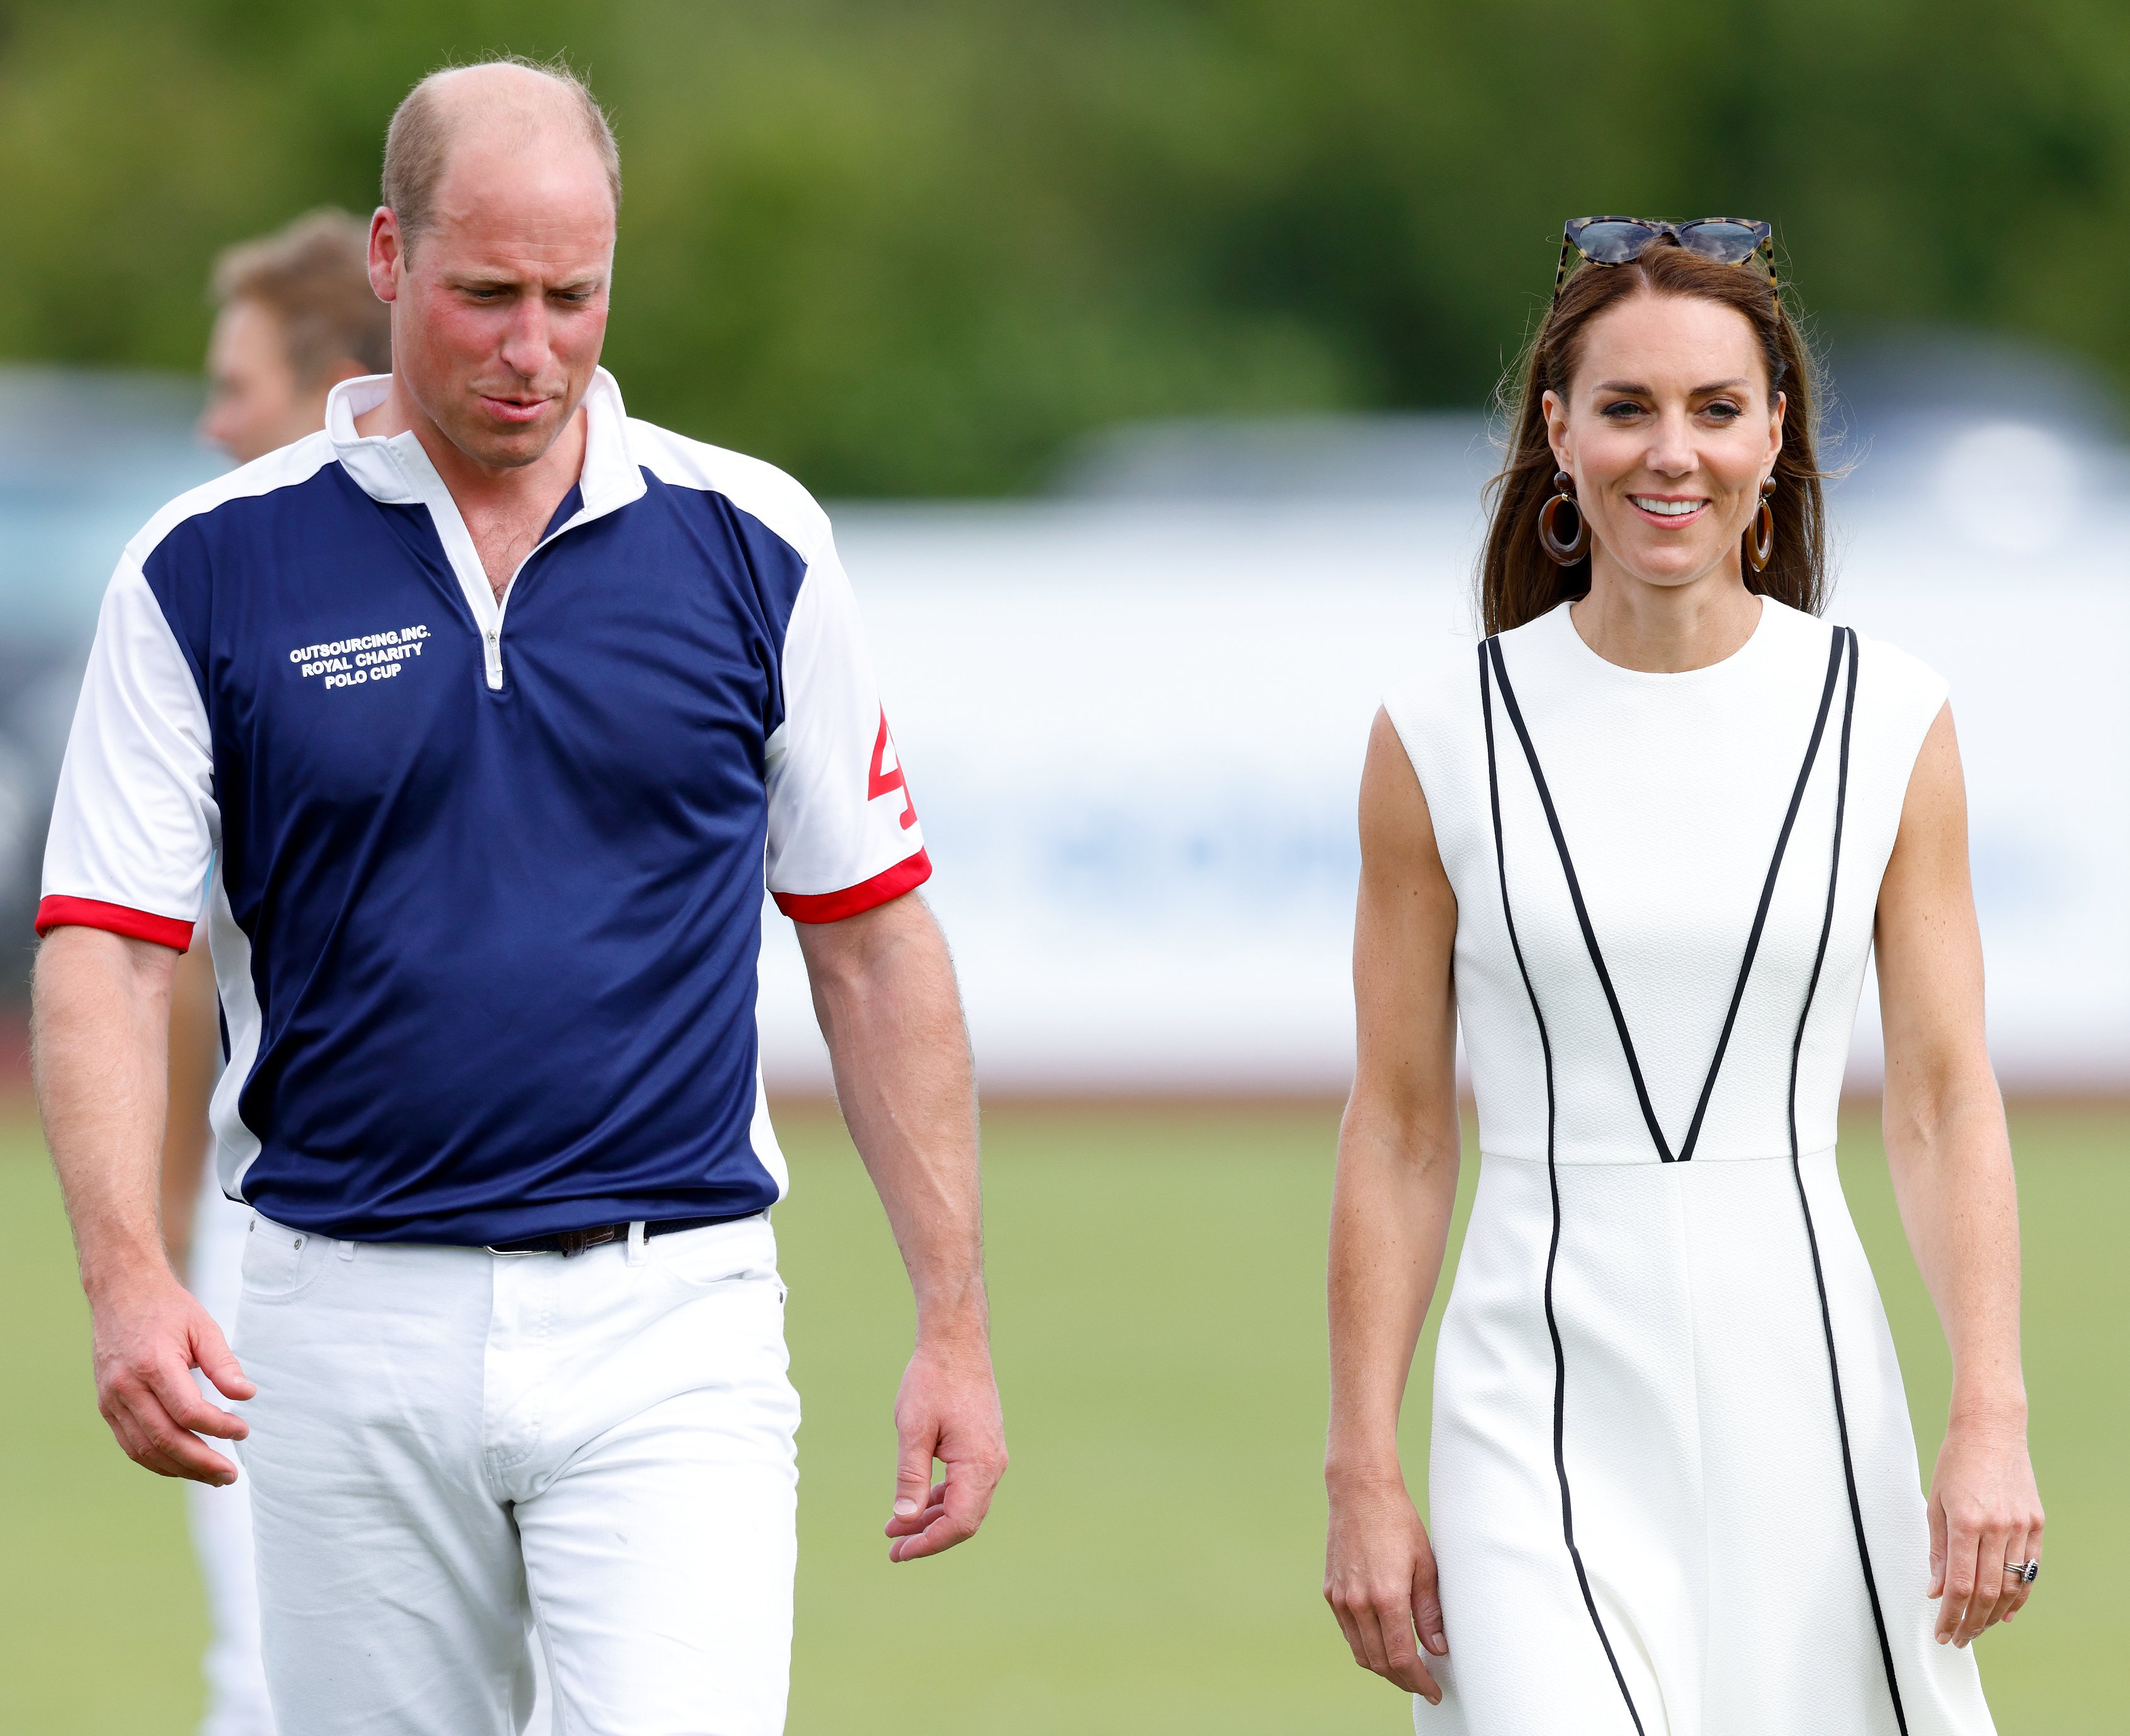 Prince William, Duke of Cambridge, and Catherine, Duchess of Cambridge attend the Out-Sourcing Inc. Royal Charity Polo Cup at Guards Polo Club, Flemish Farm, on July 6, 2022, in Windsor, England. | Source: Getty Images